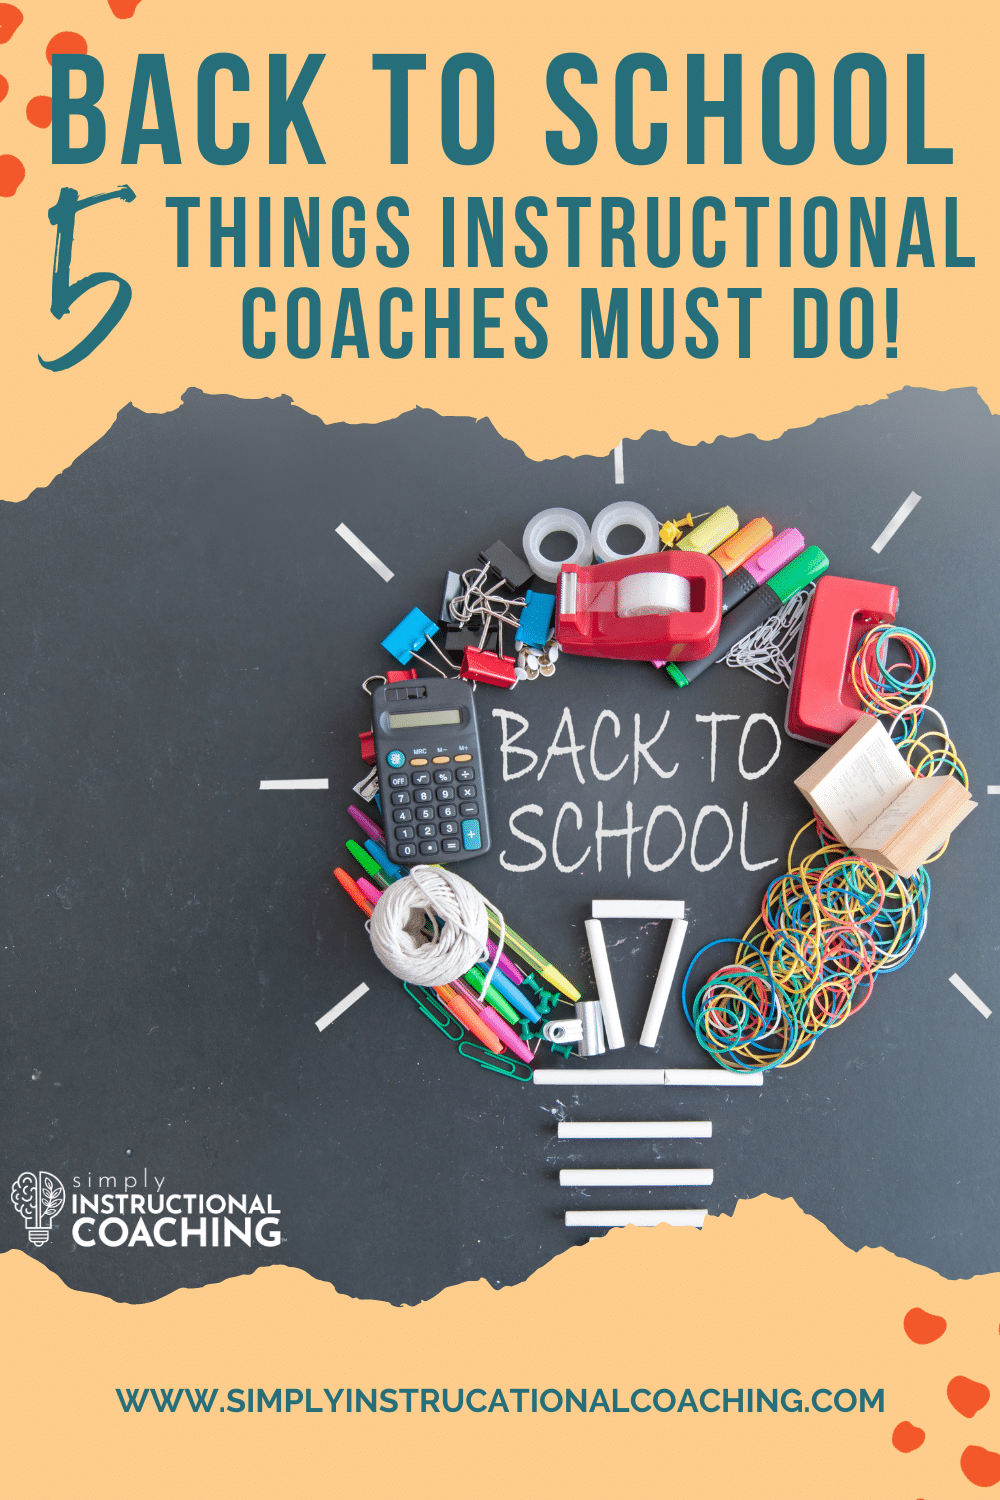 Back to School 5 things instructional coaches must do